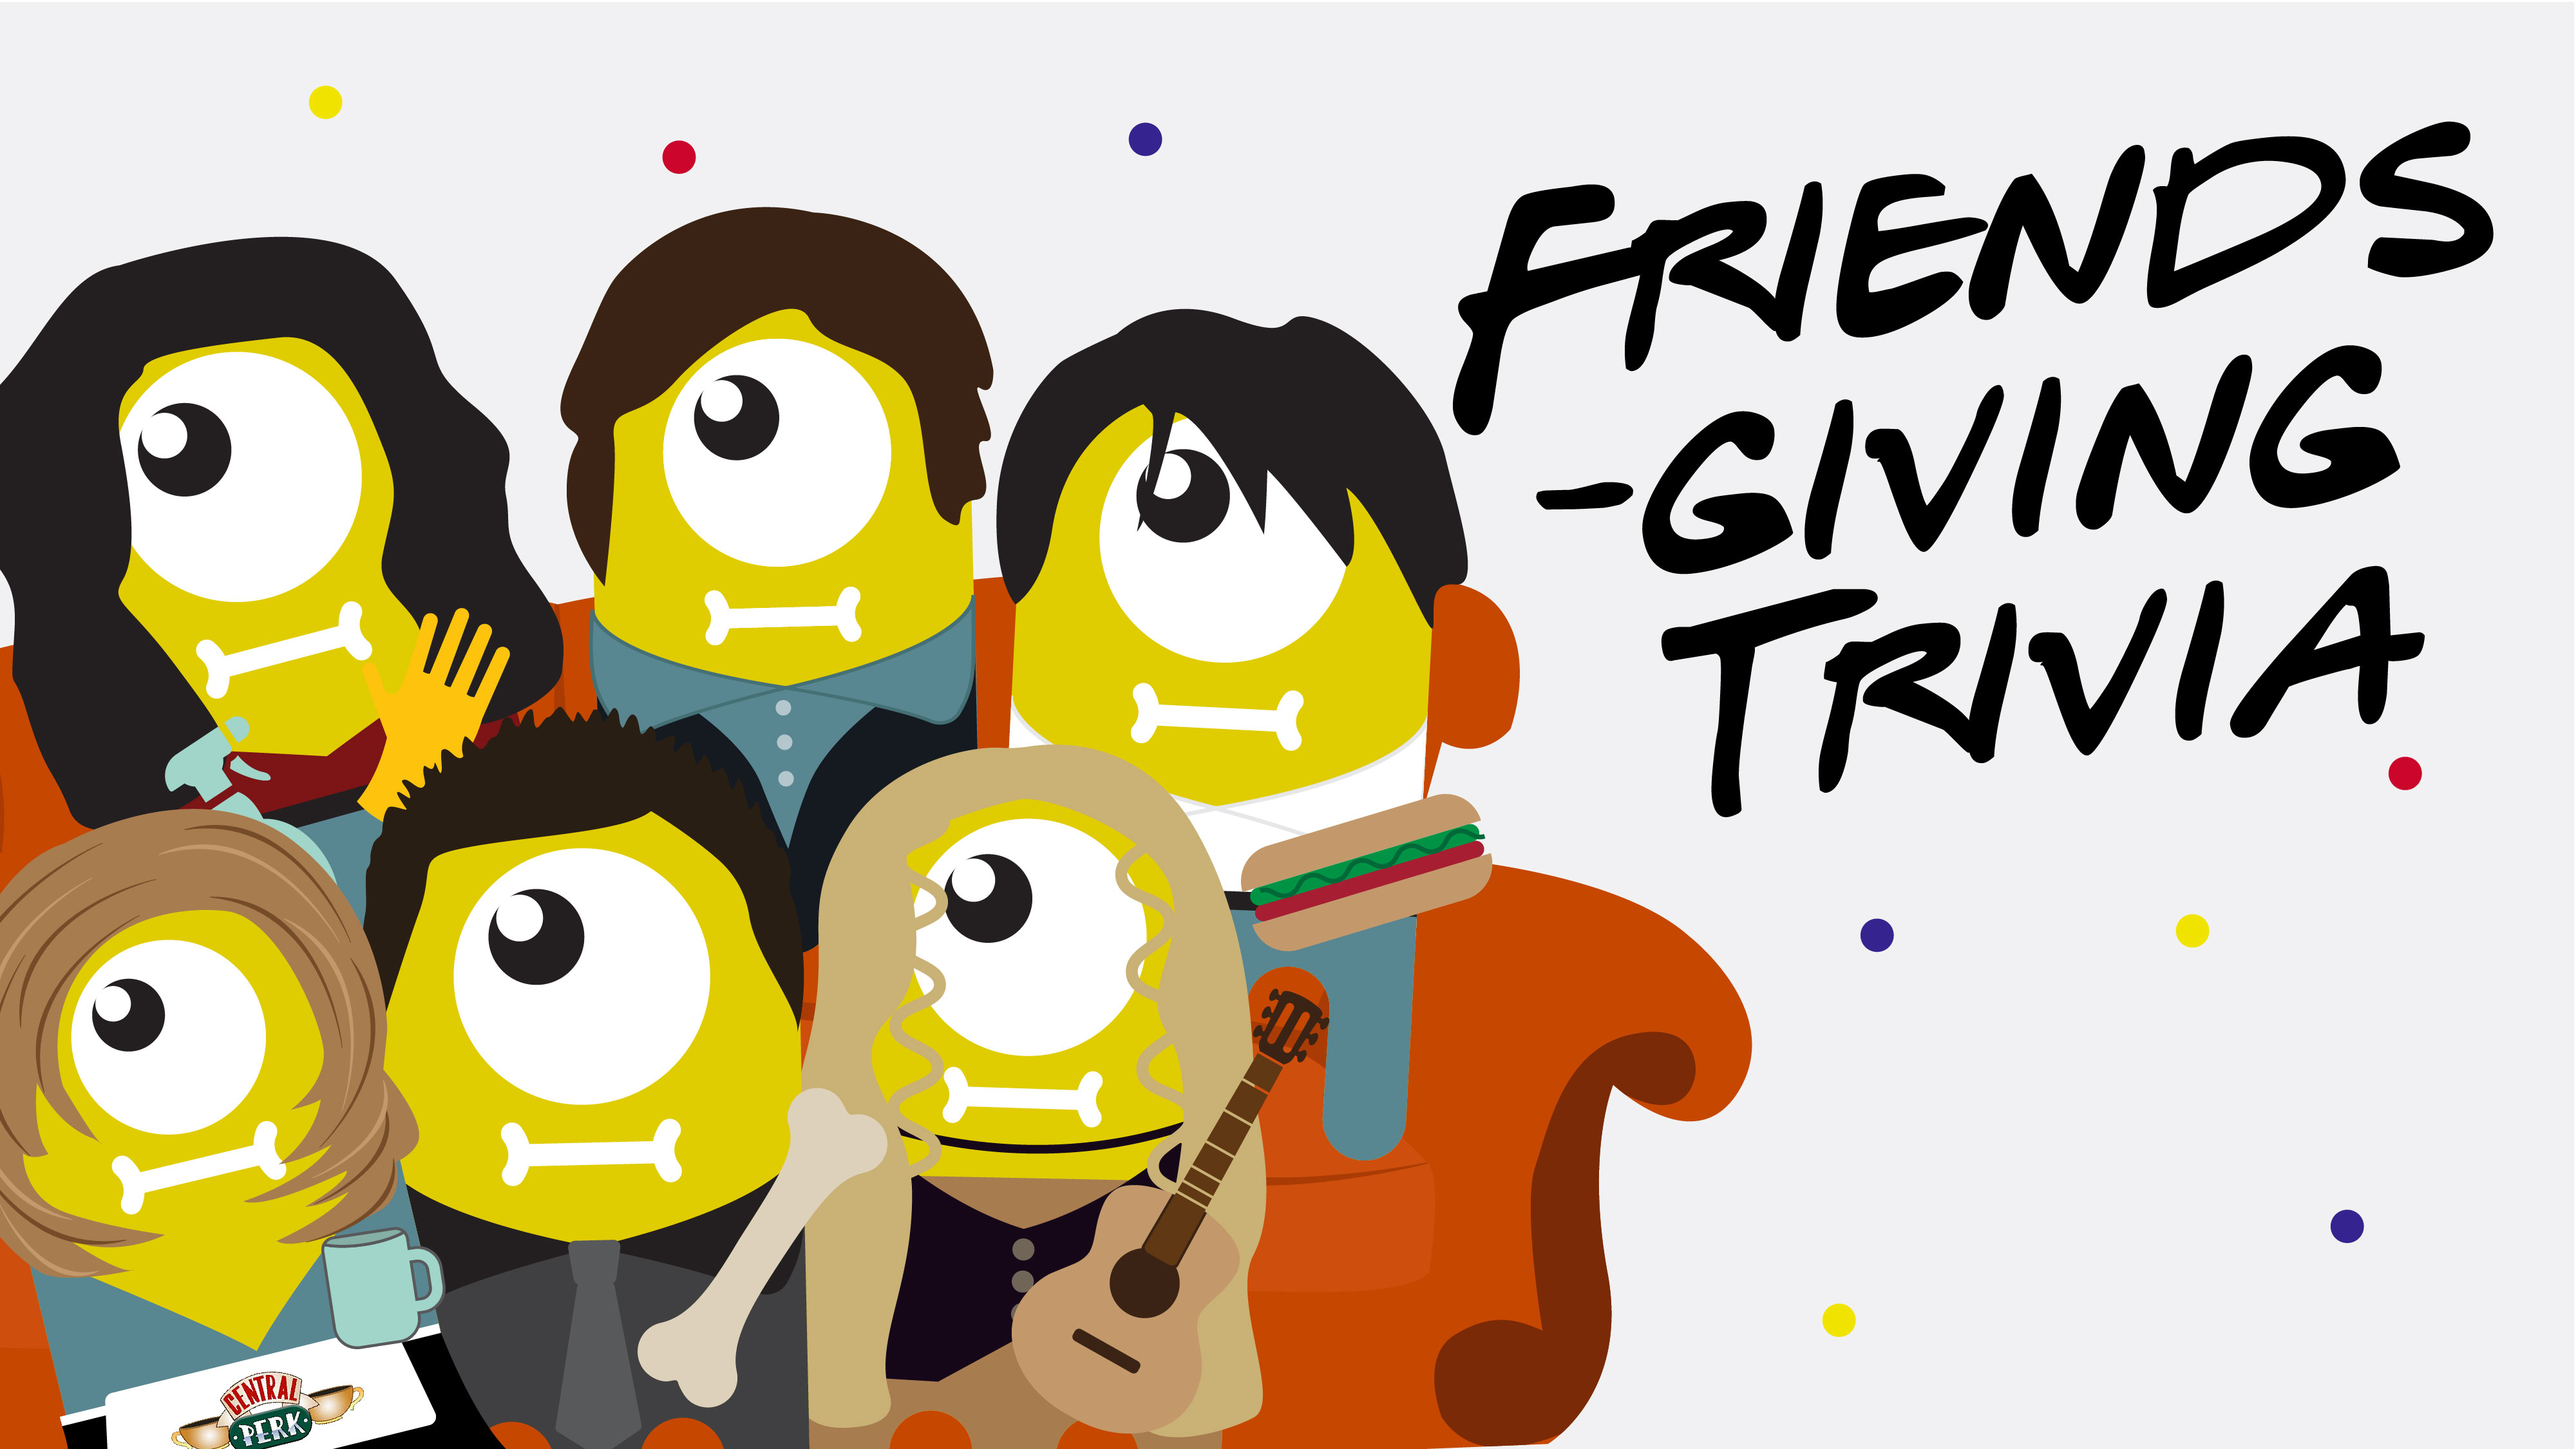 Graphic for Friends-giving trivia night with Friends-themed aliens